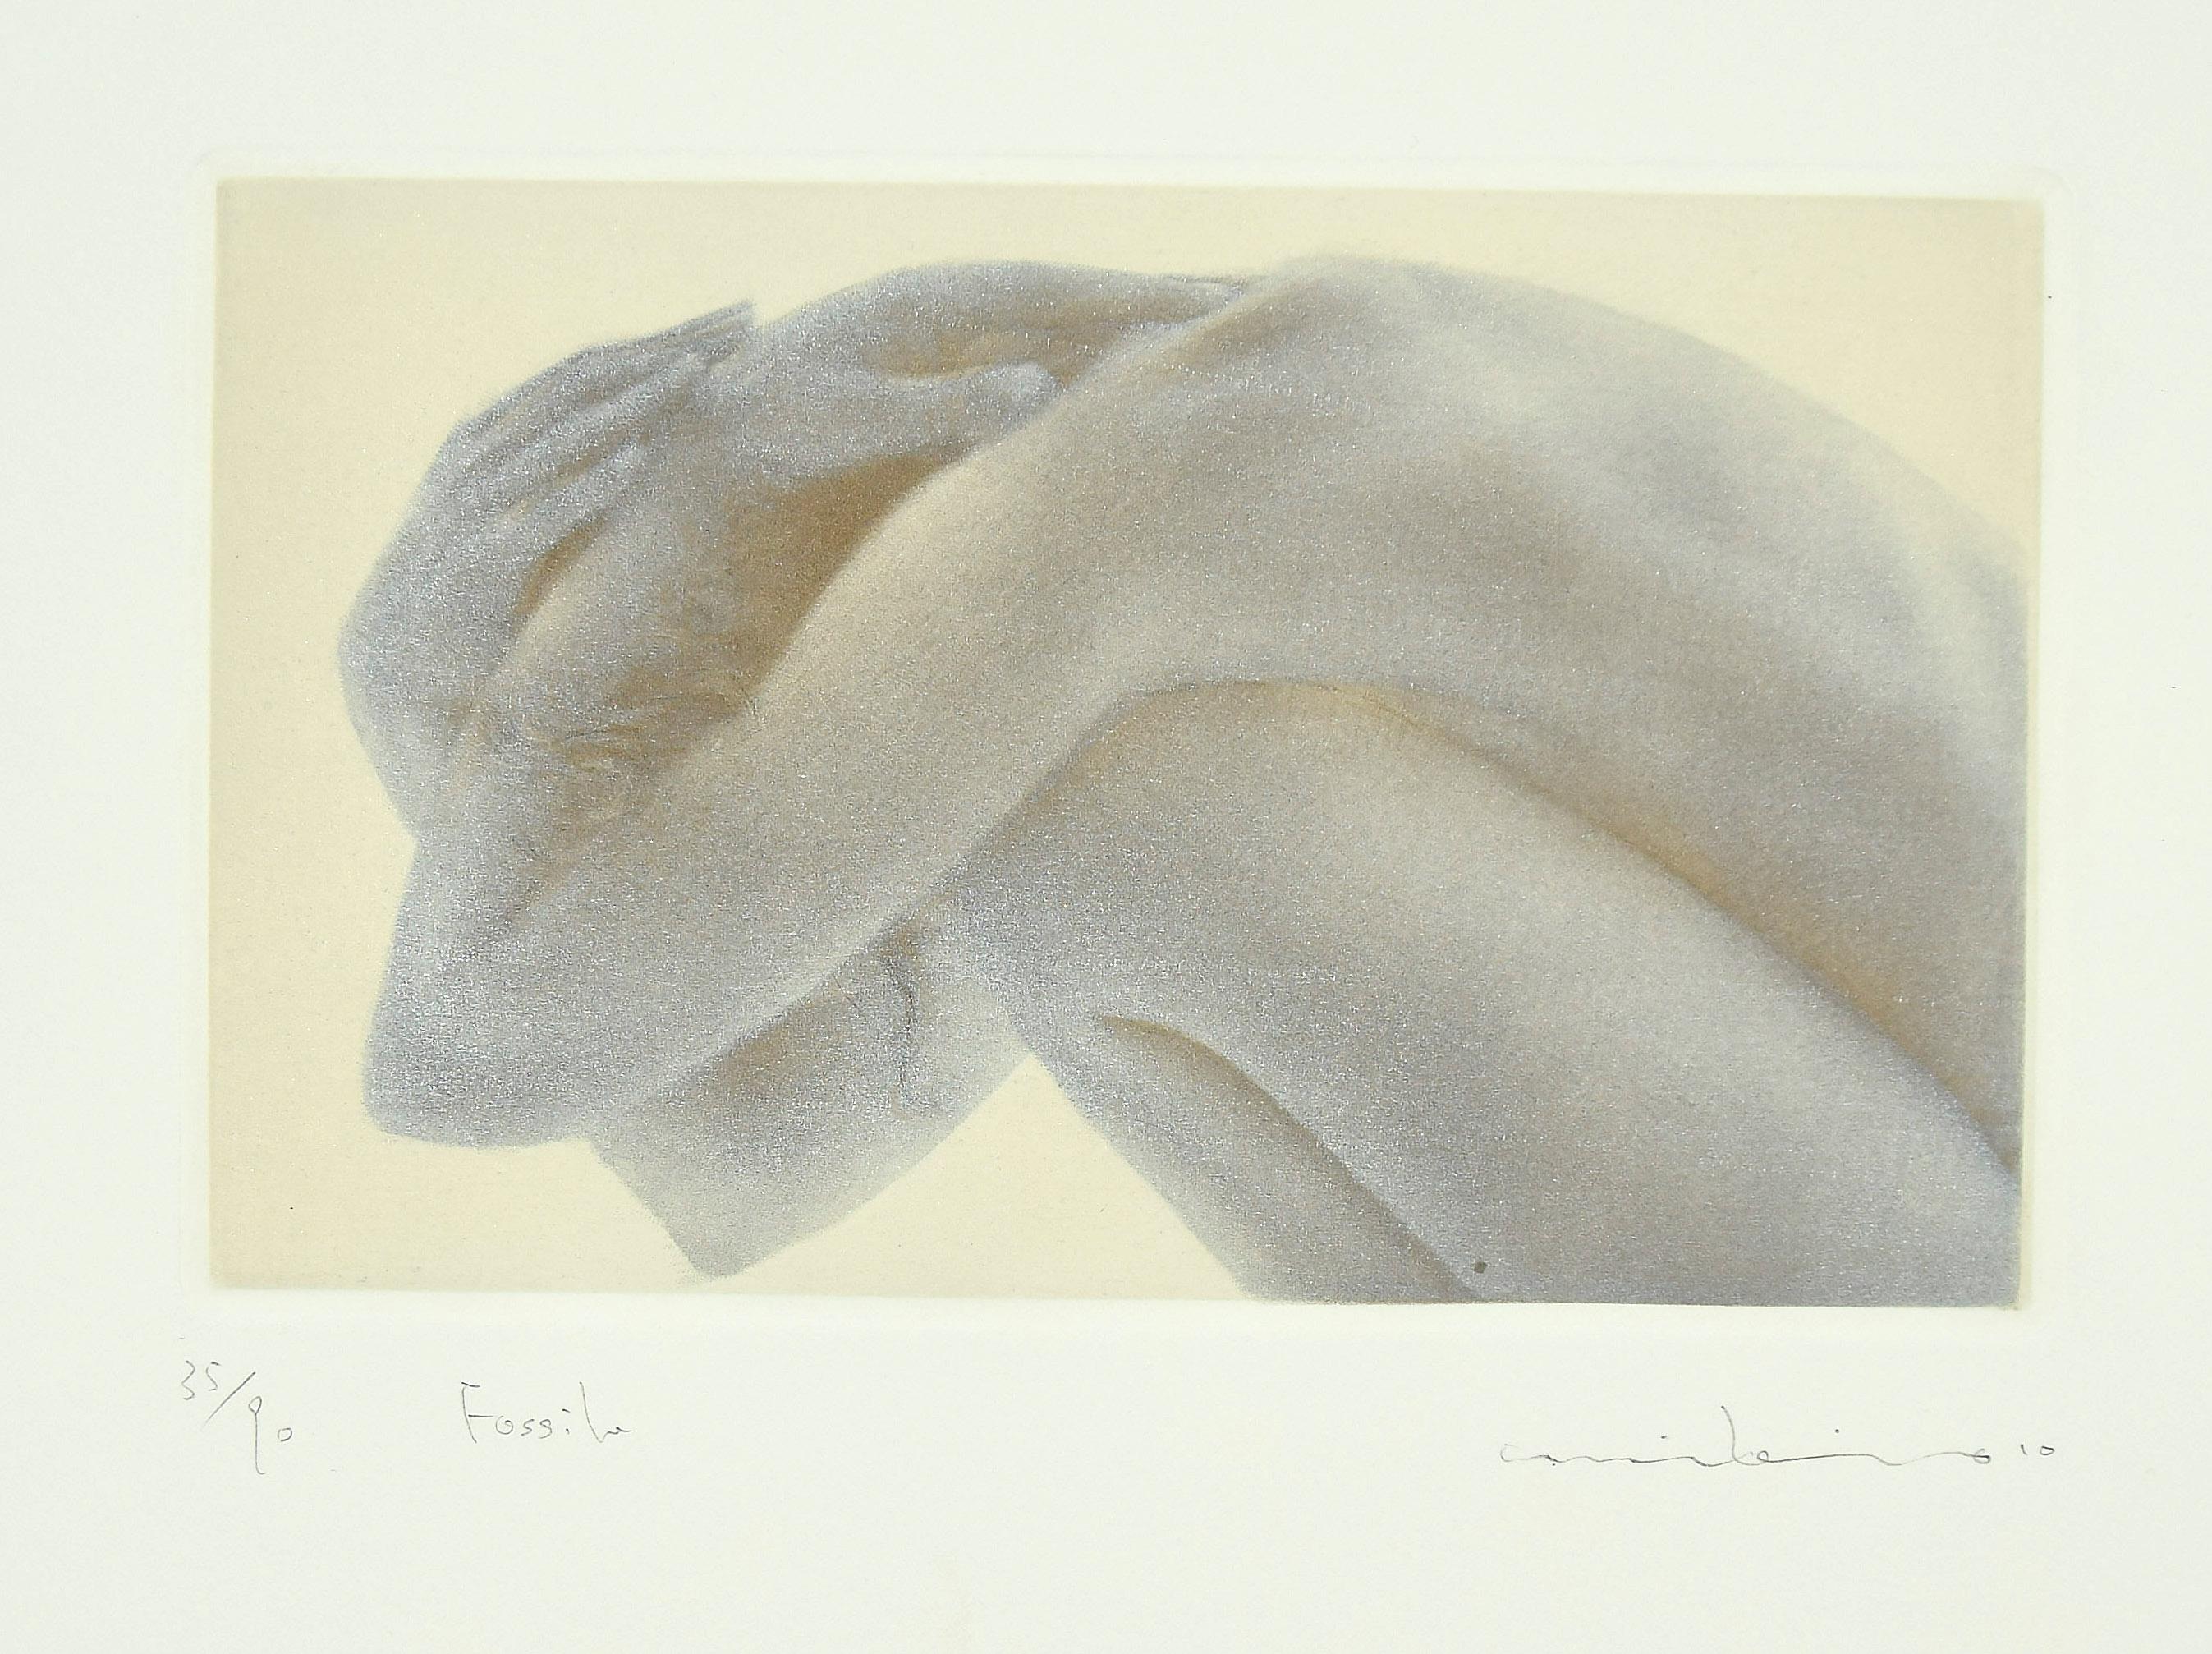 Unknown Nude Print - Fossil - Original Photolithograph - 20th Century